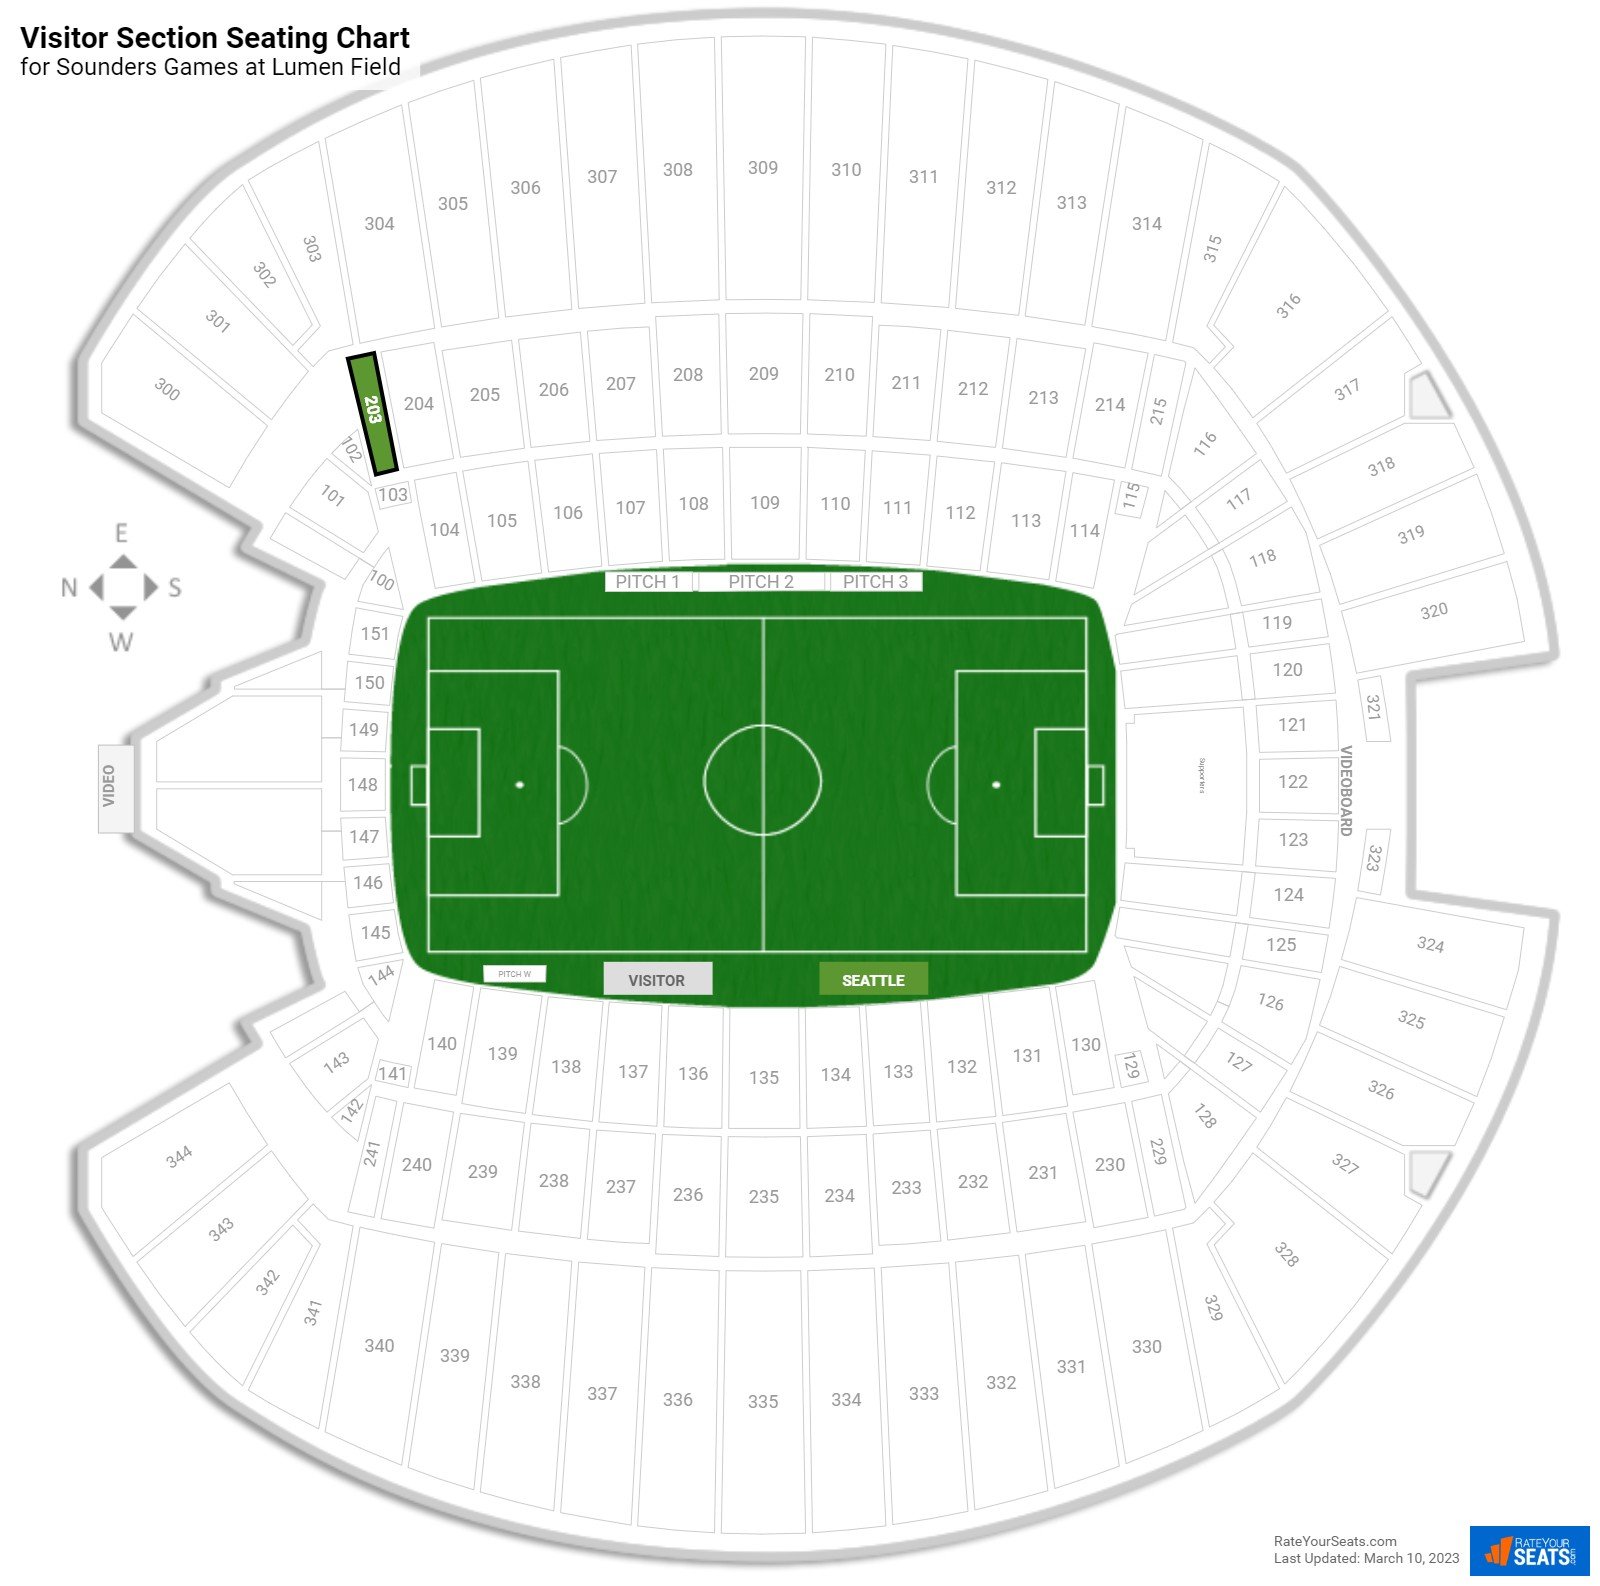 Sounders Visitor Section Seating Chart at Lumen Field